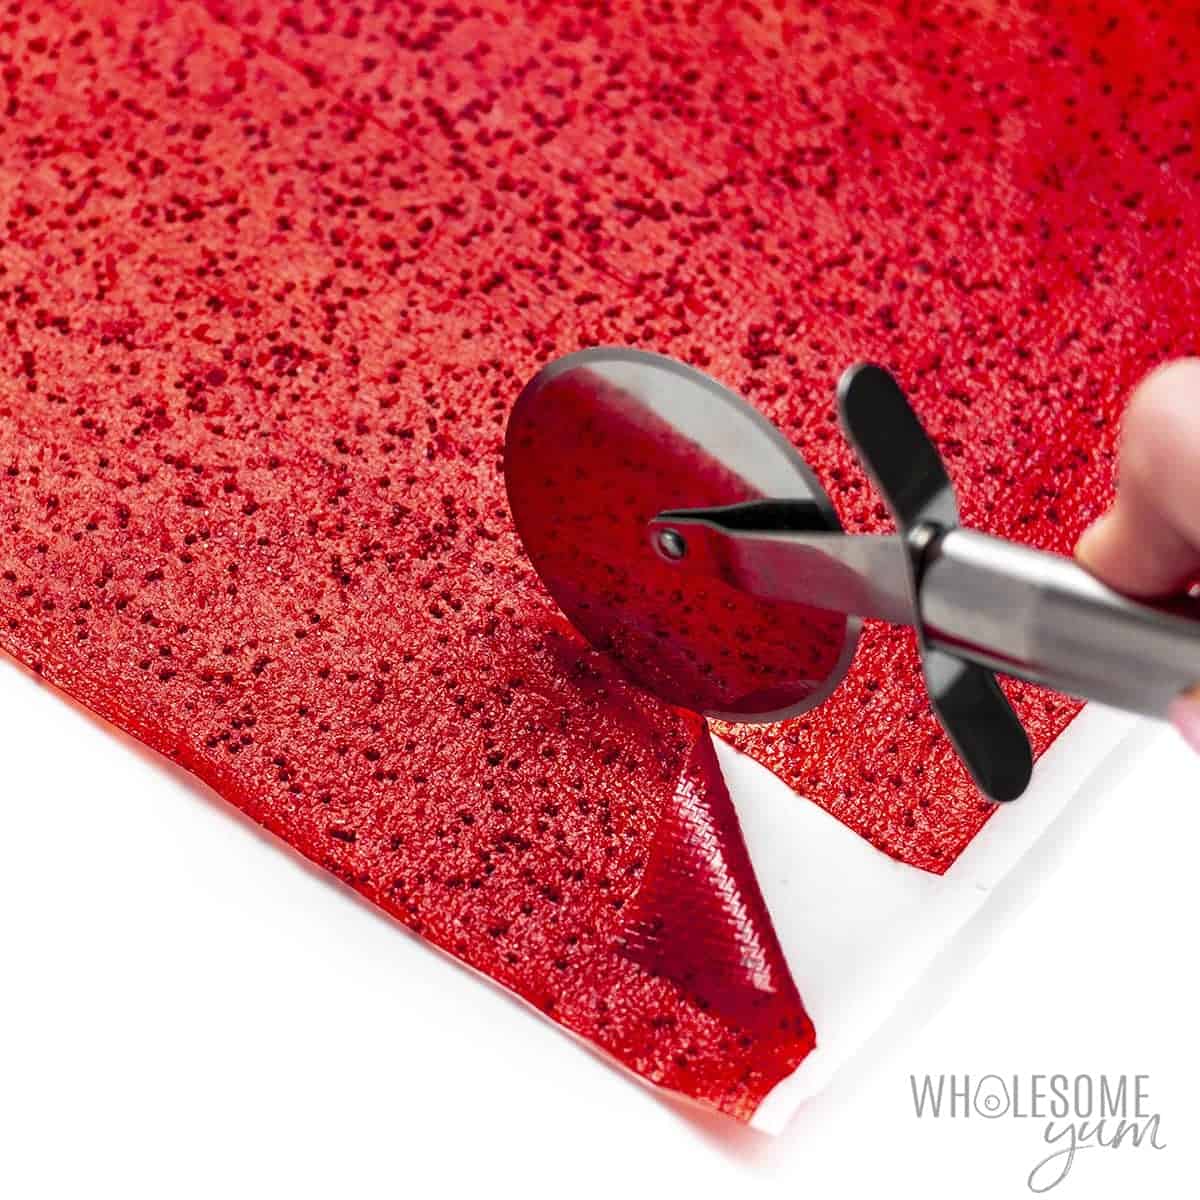 Fruit roll ups sliced with pizza cutter.